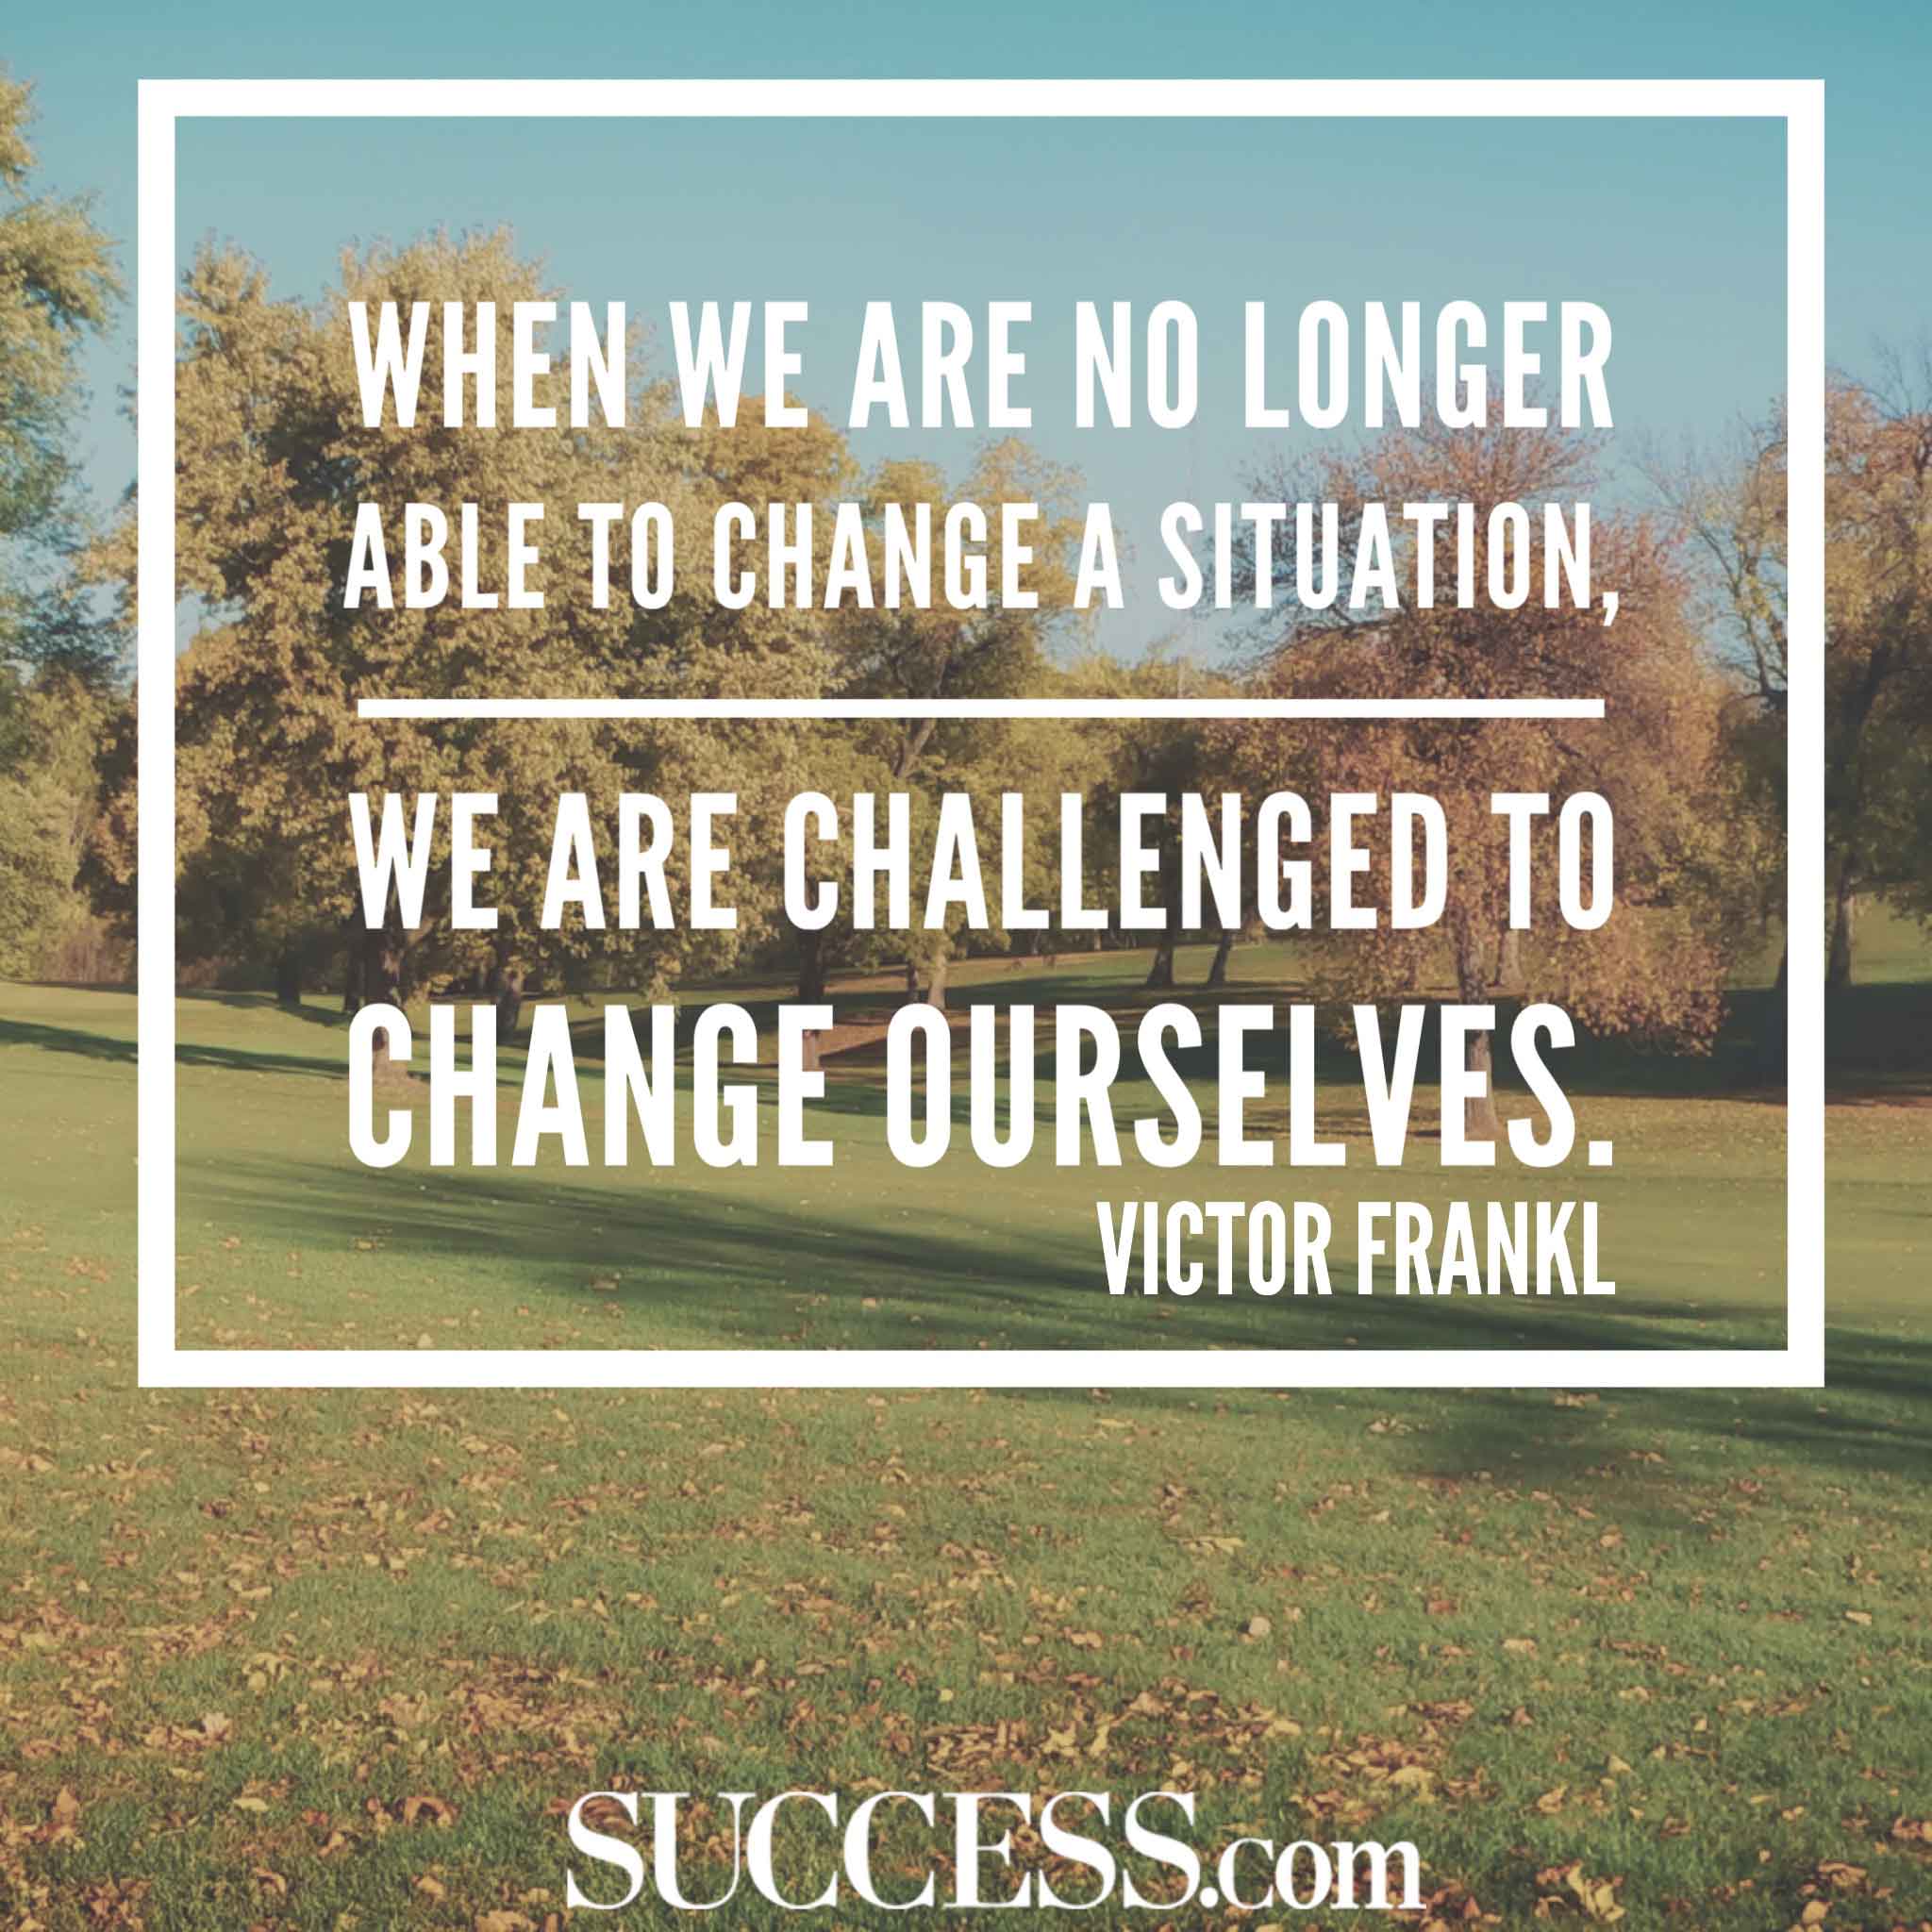 21 Insightful Quotes About Embracing Change